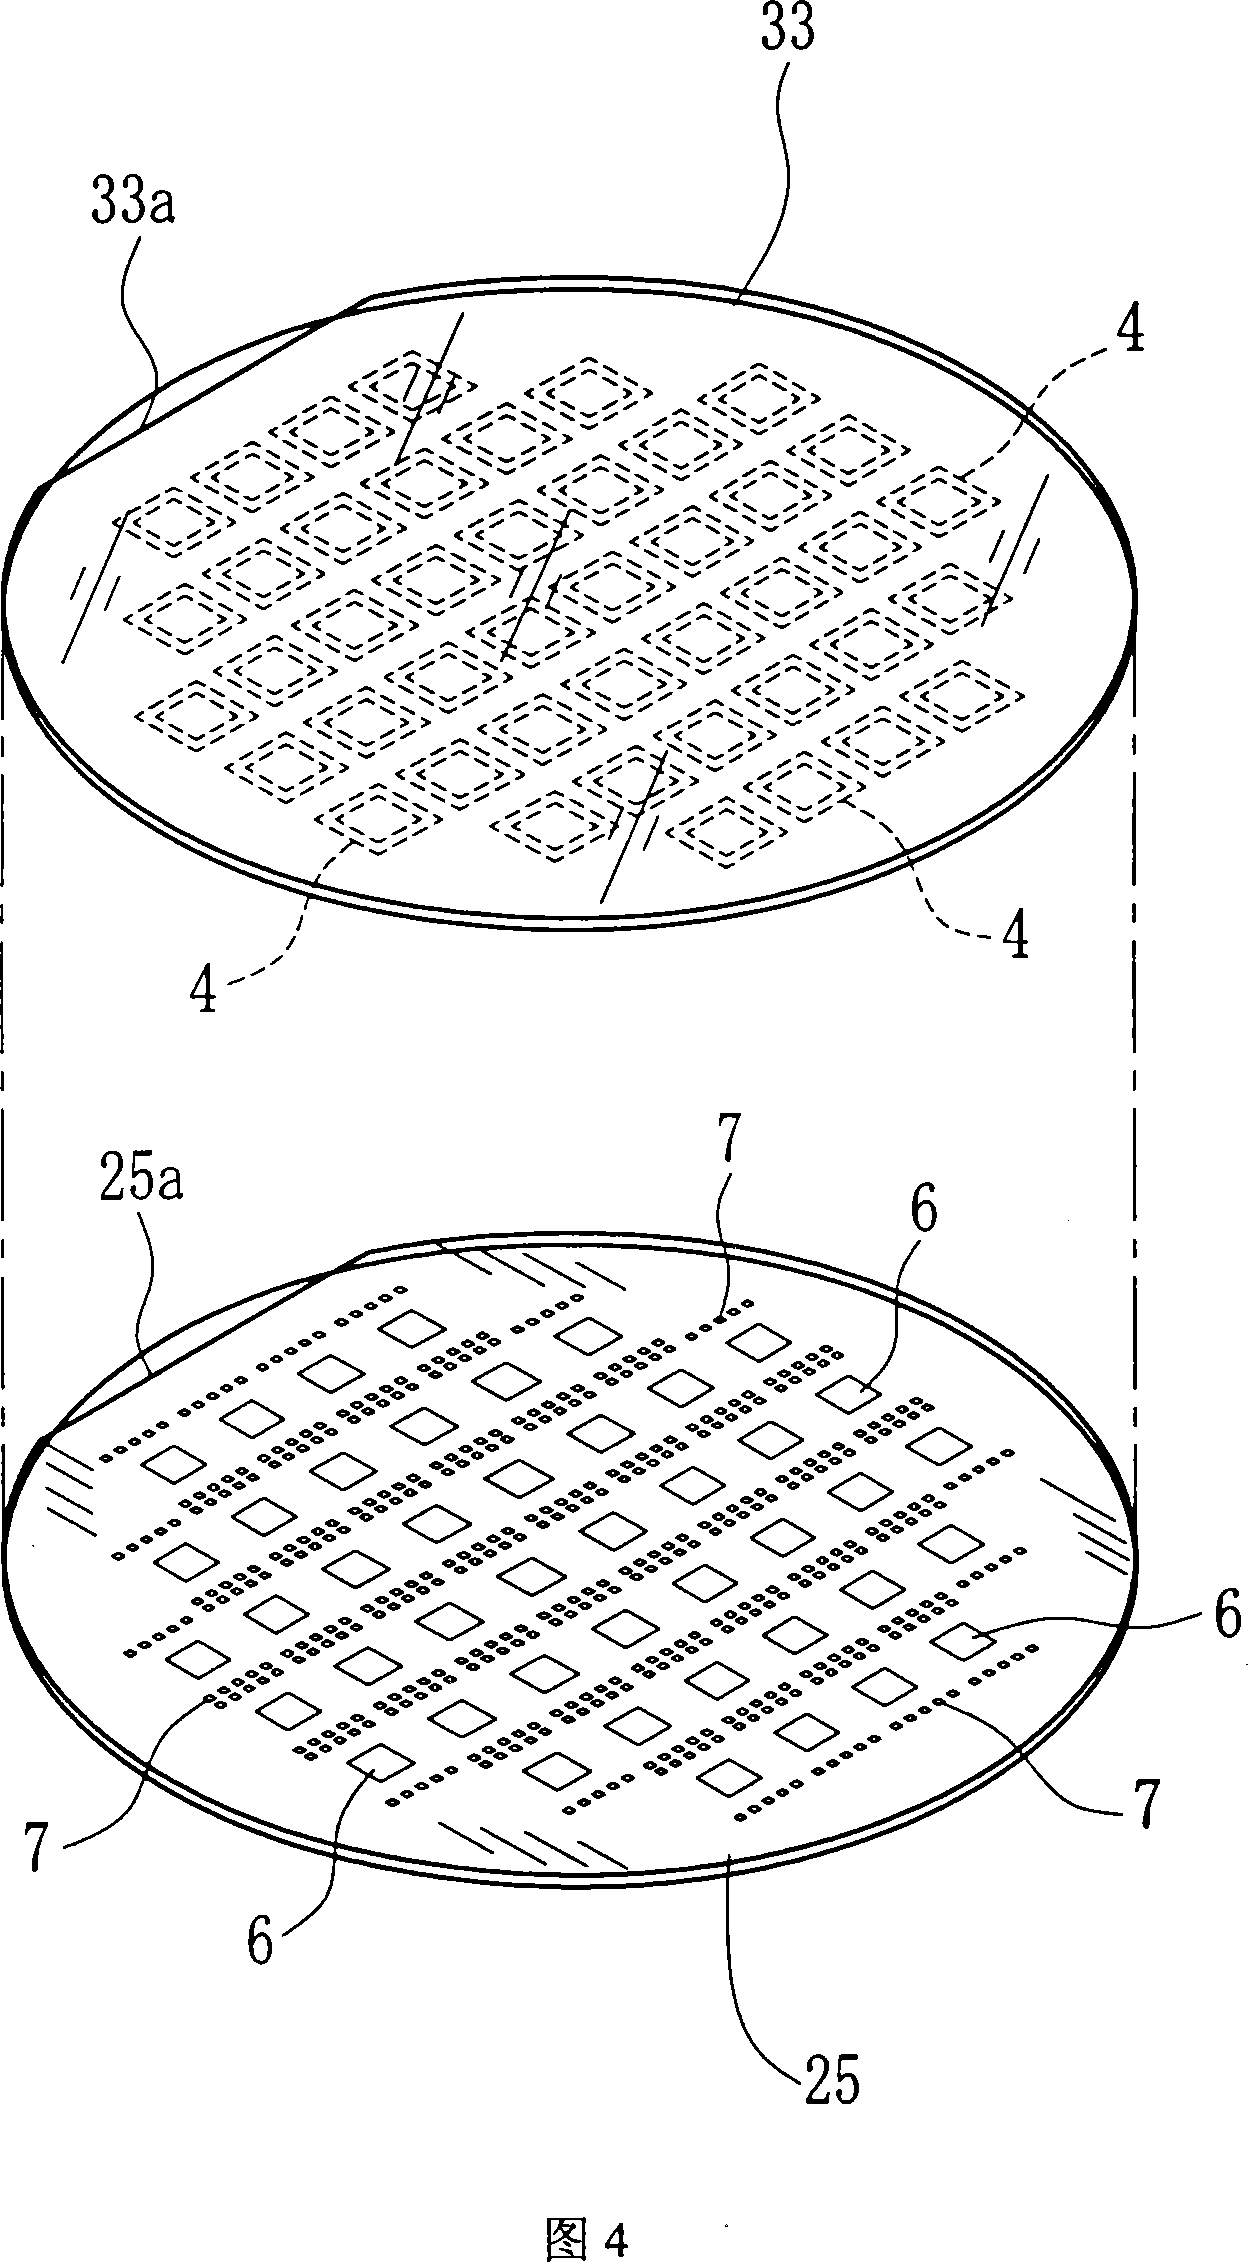 Device and method for joining substrates